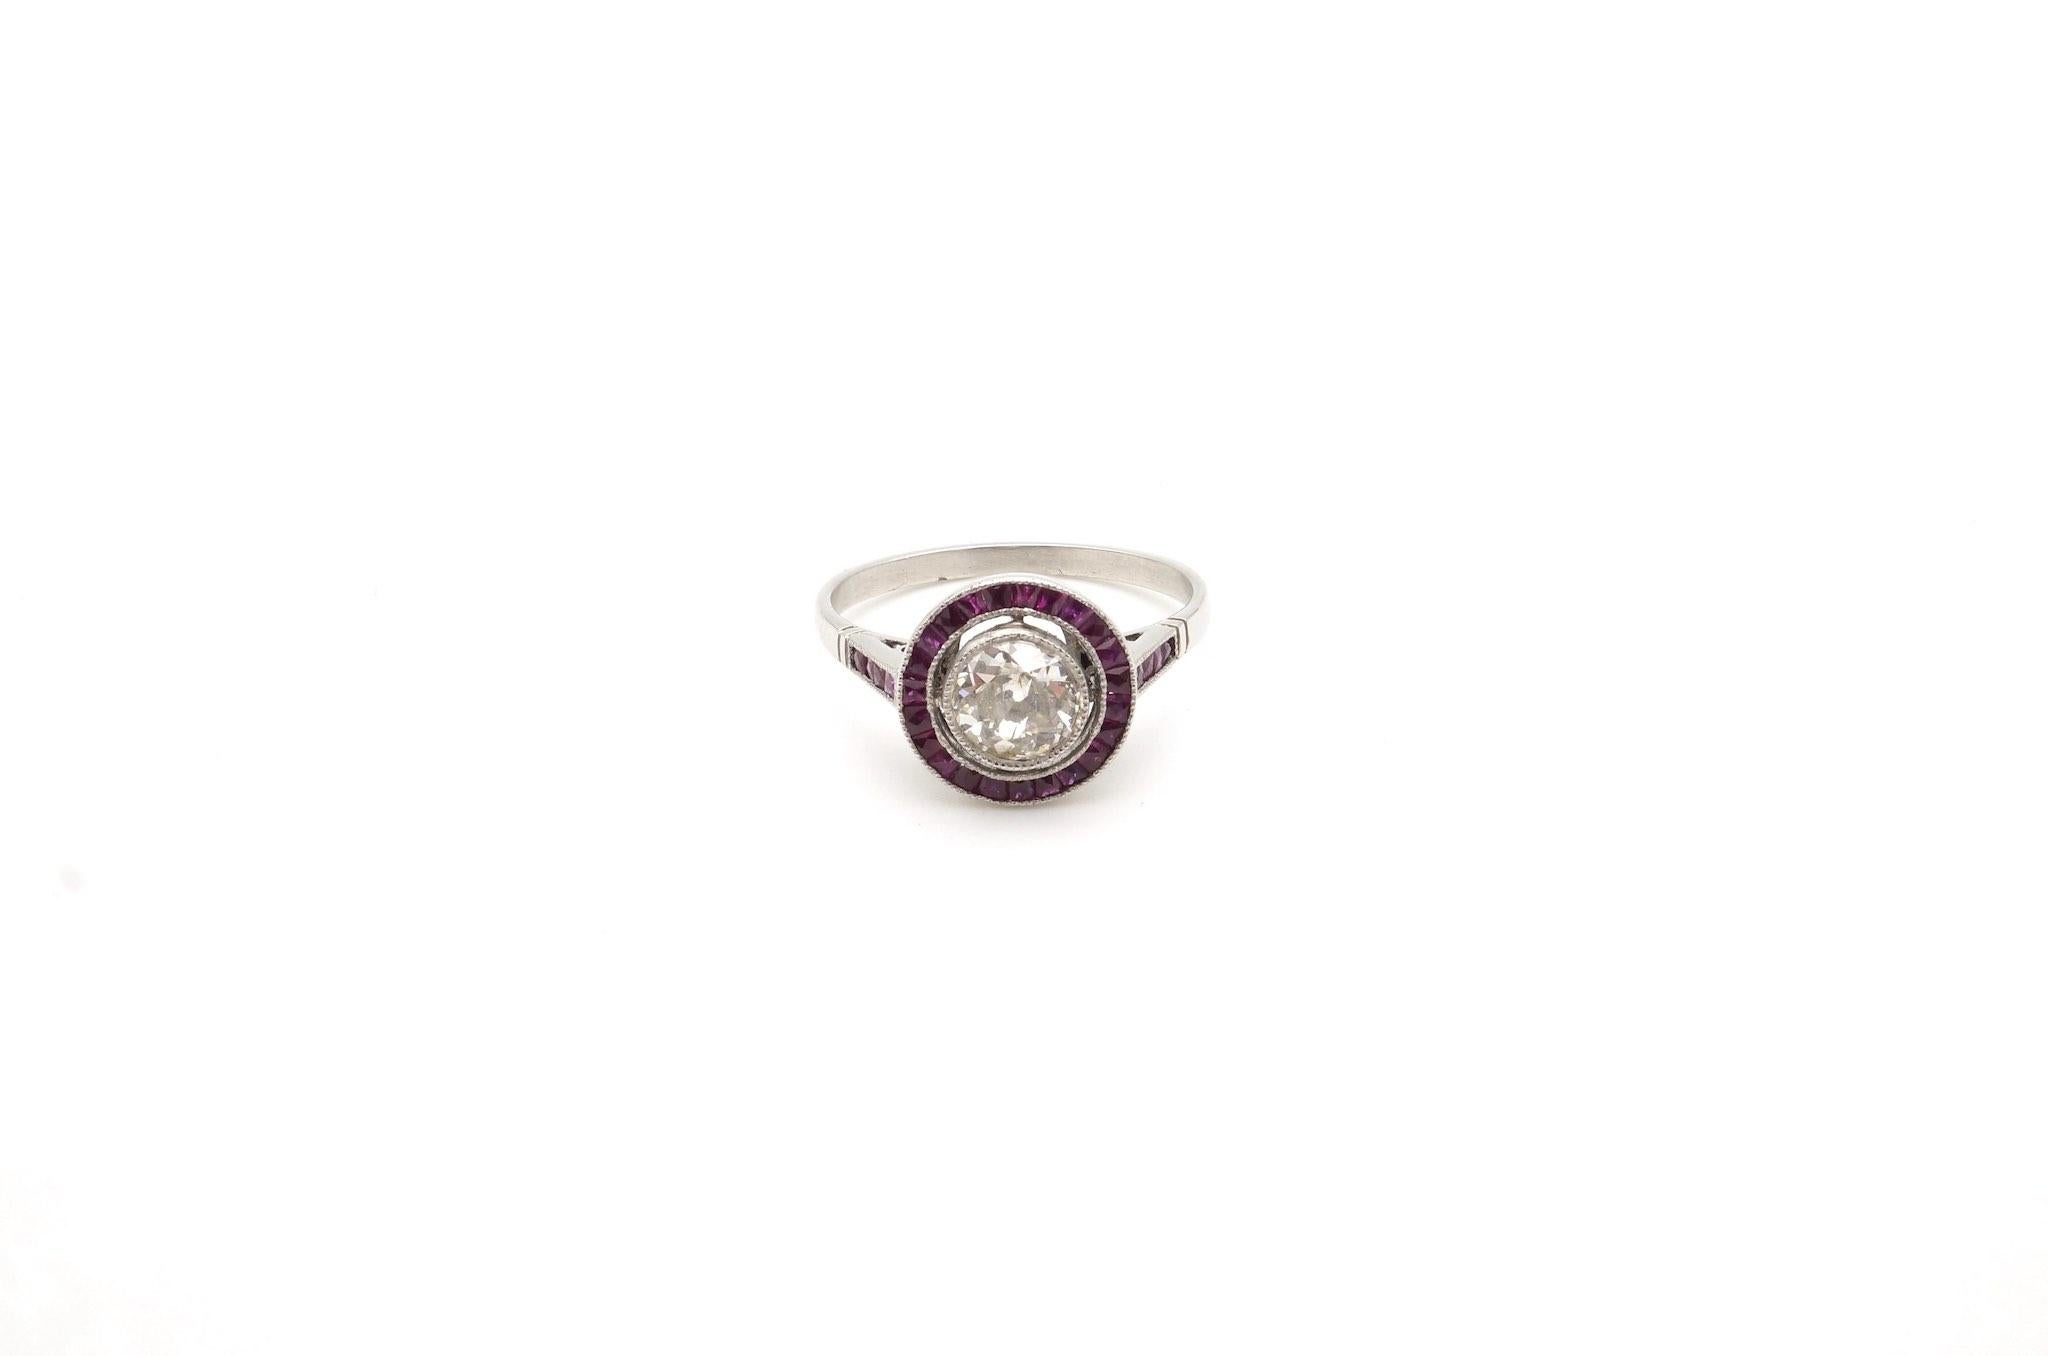 Stones: Old cut diamond
for a total weight of 0.65 carat and calibrated rubies.
Material: Platinum
Dimensions: Diameter of 1.10cm
Period: 1930
Weight: 3.8g
Size: 57 (free sizing)
Certificate
Ref. :24714